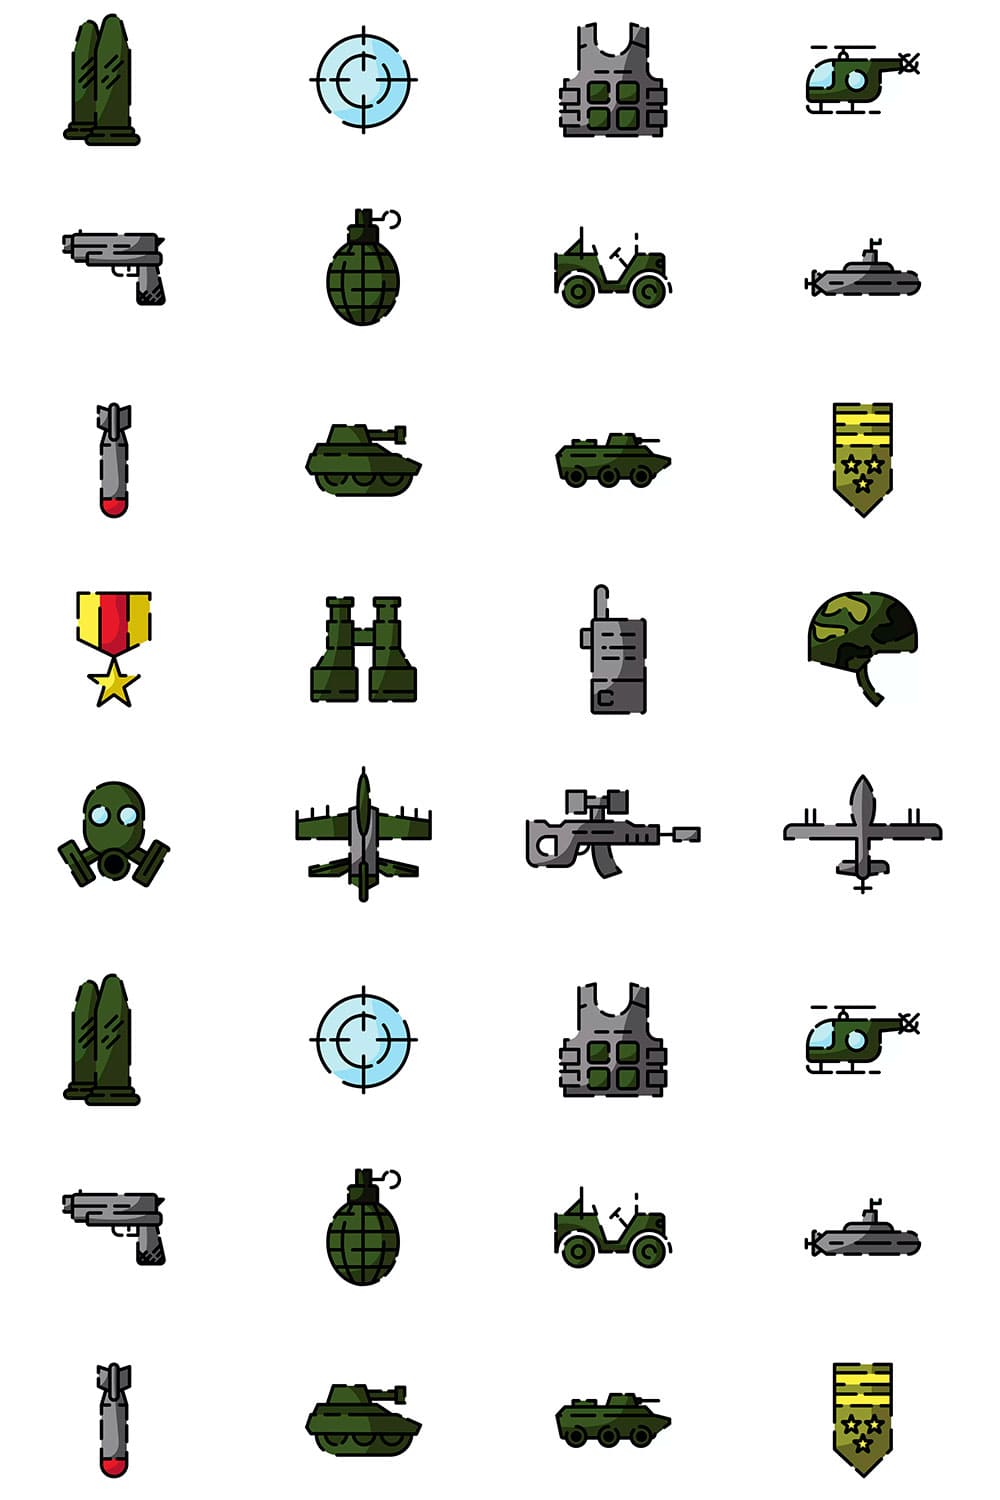 20 military icons set, picture for pinterest.